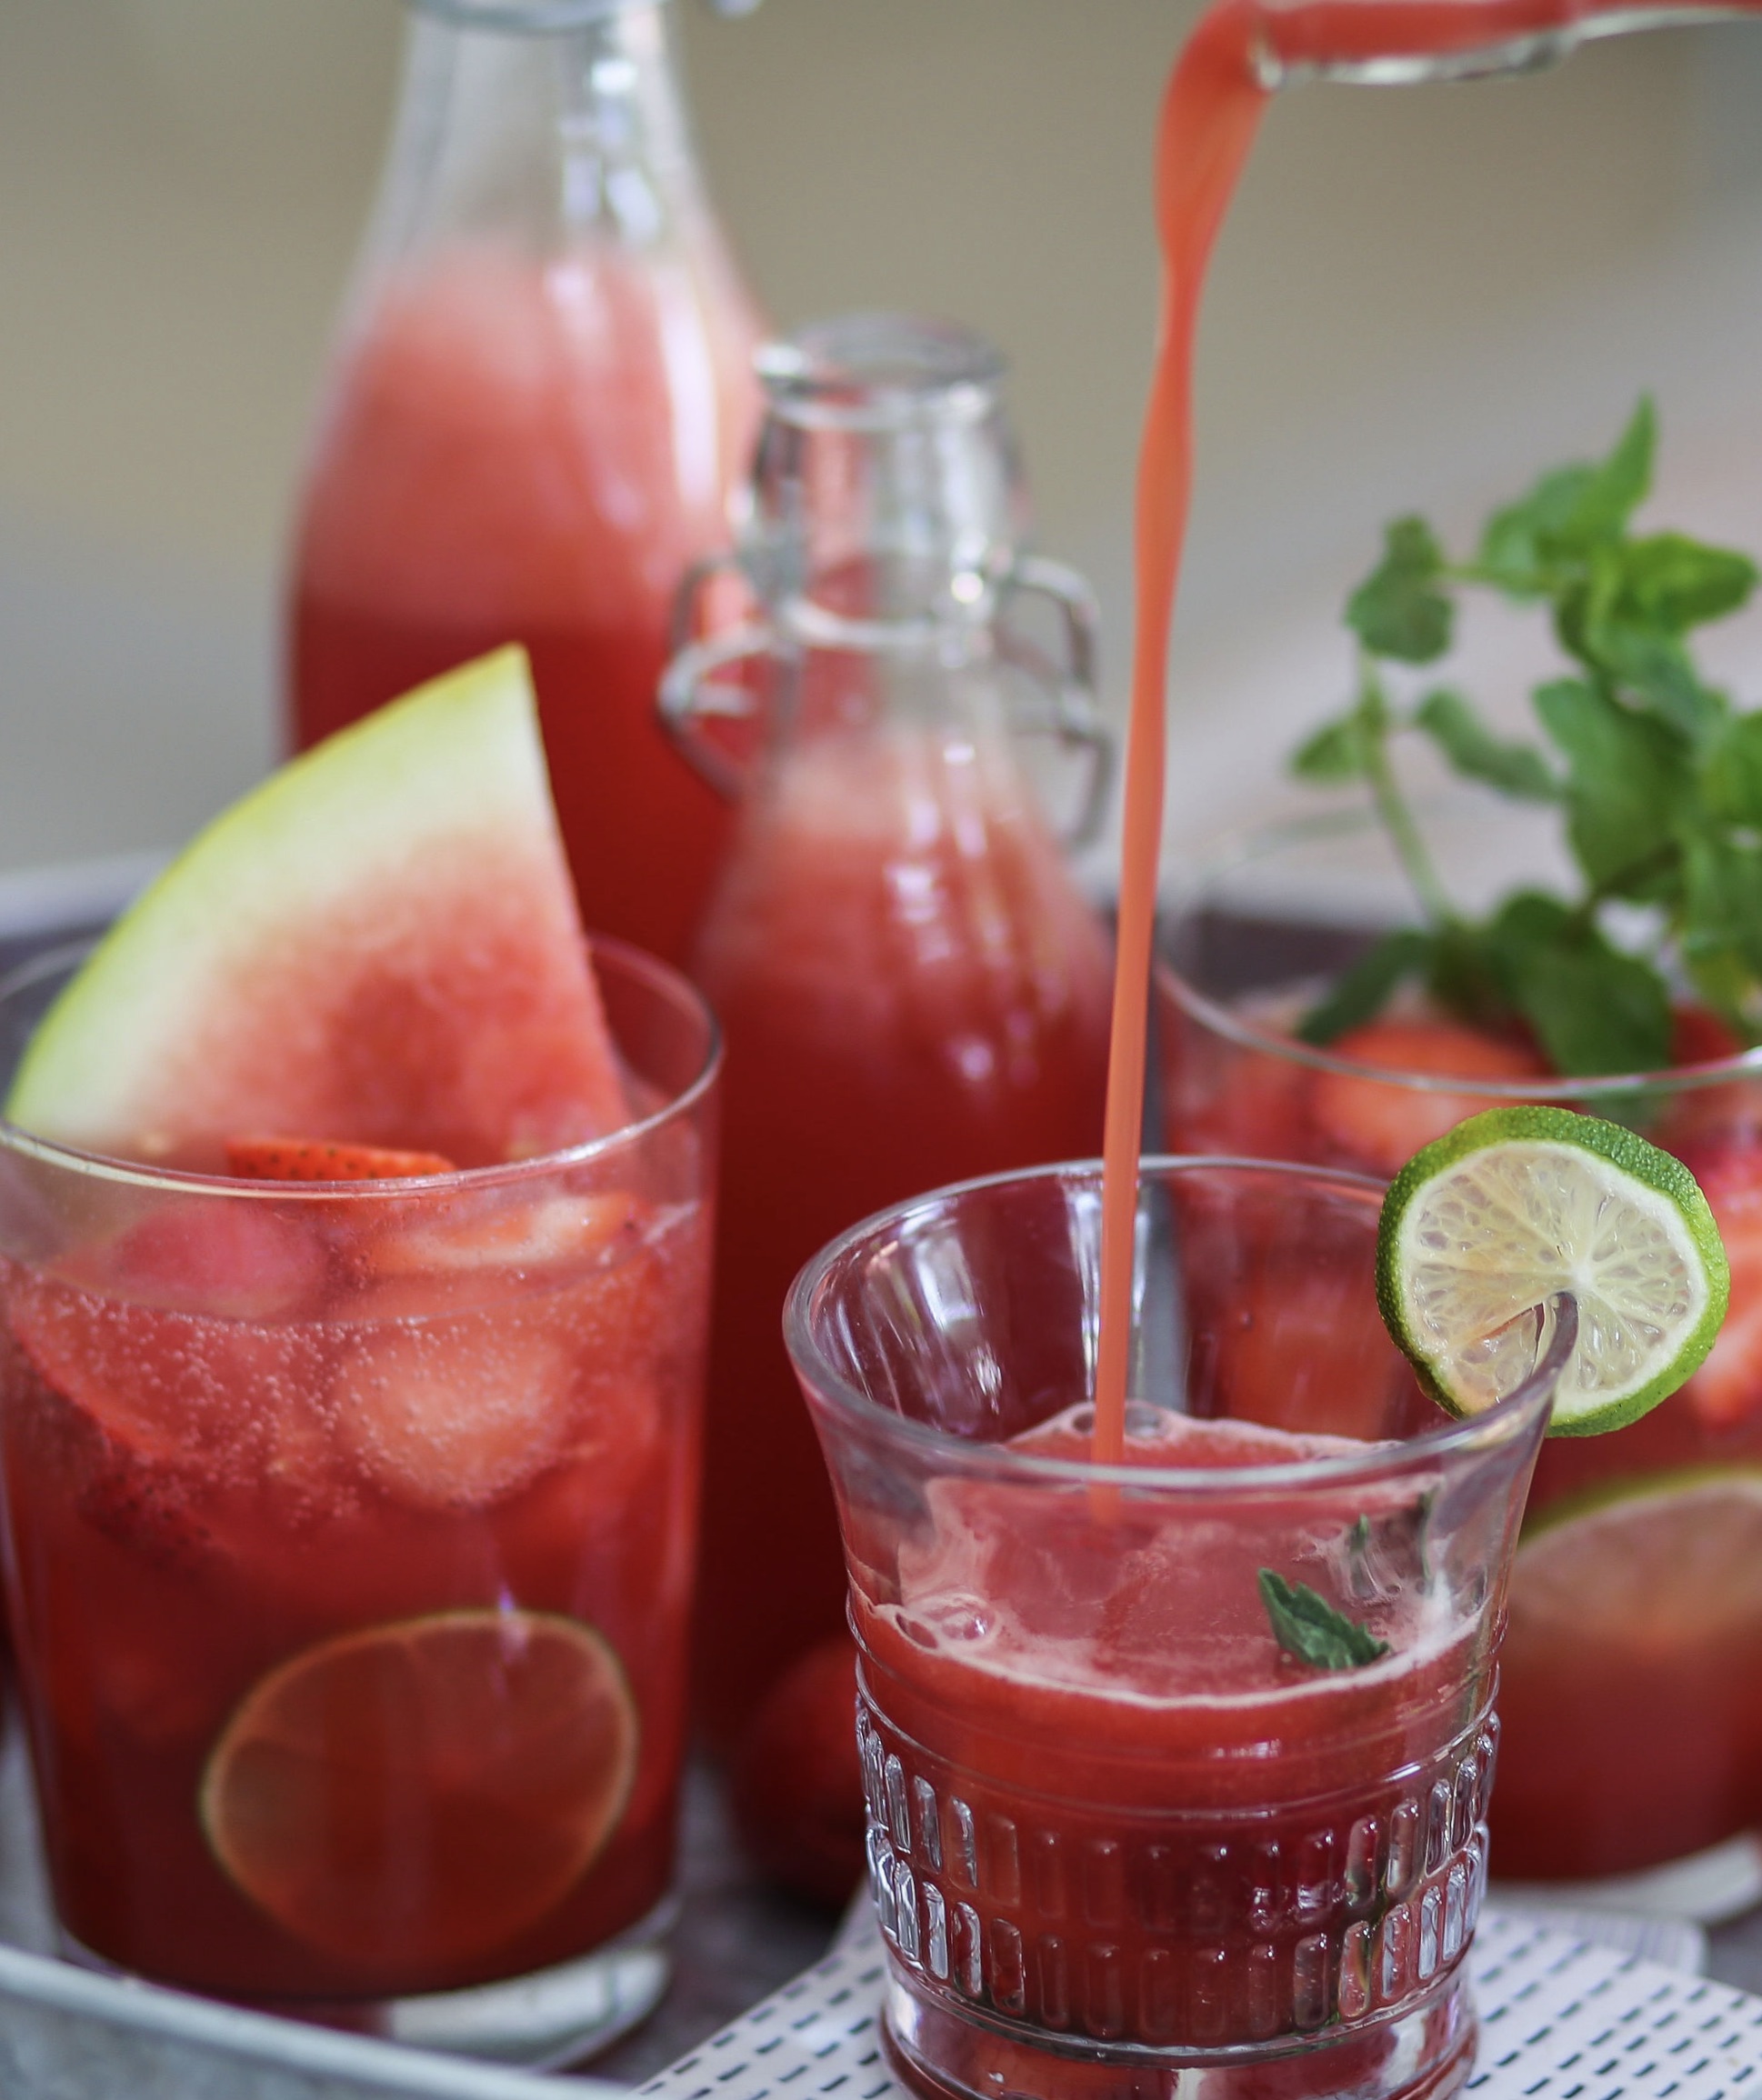 A table with glasses of watermelon juice and limes.